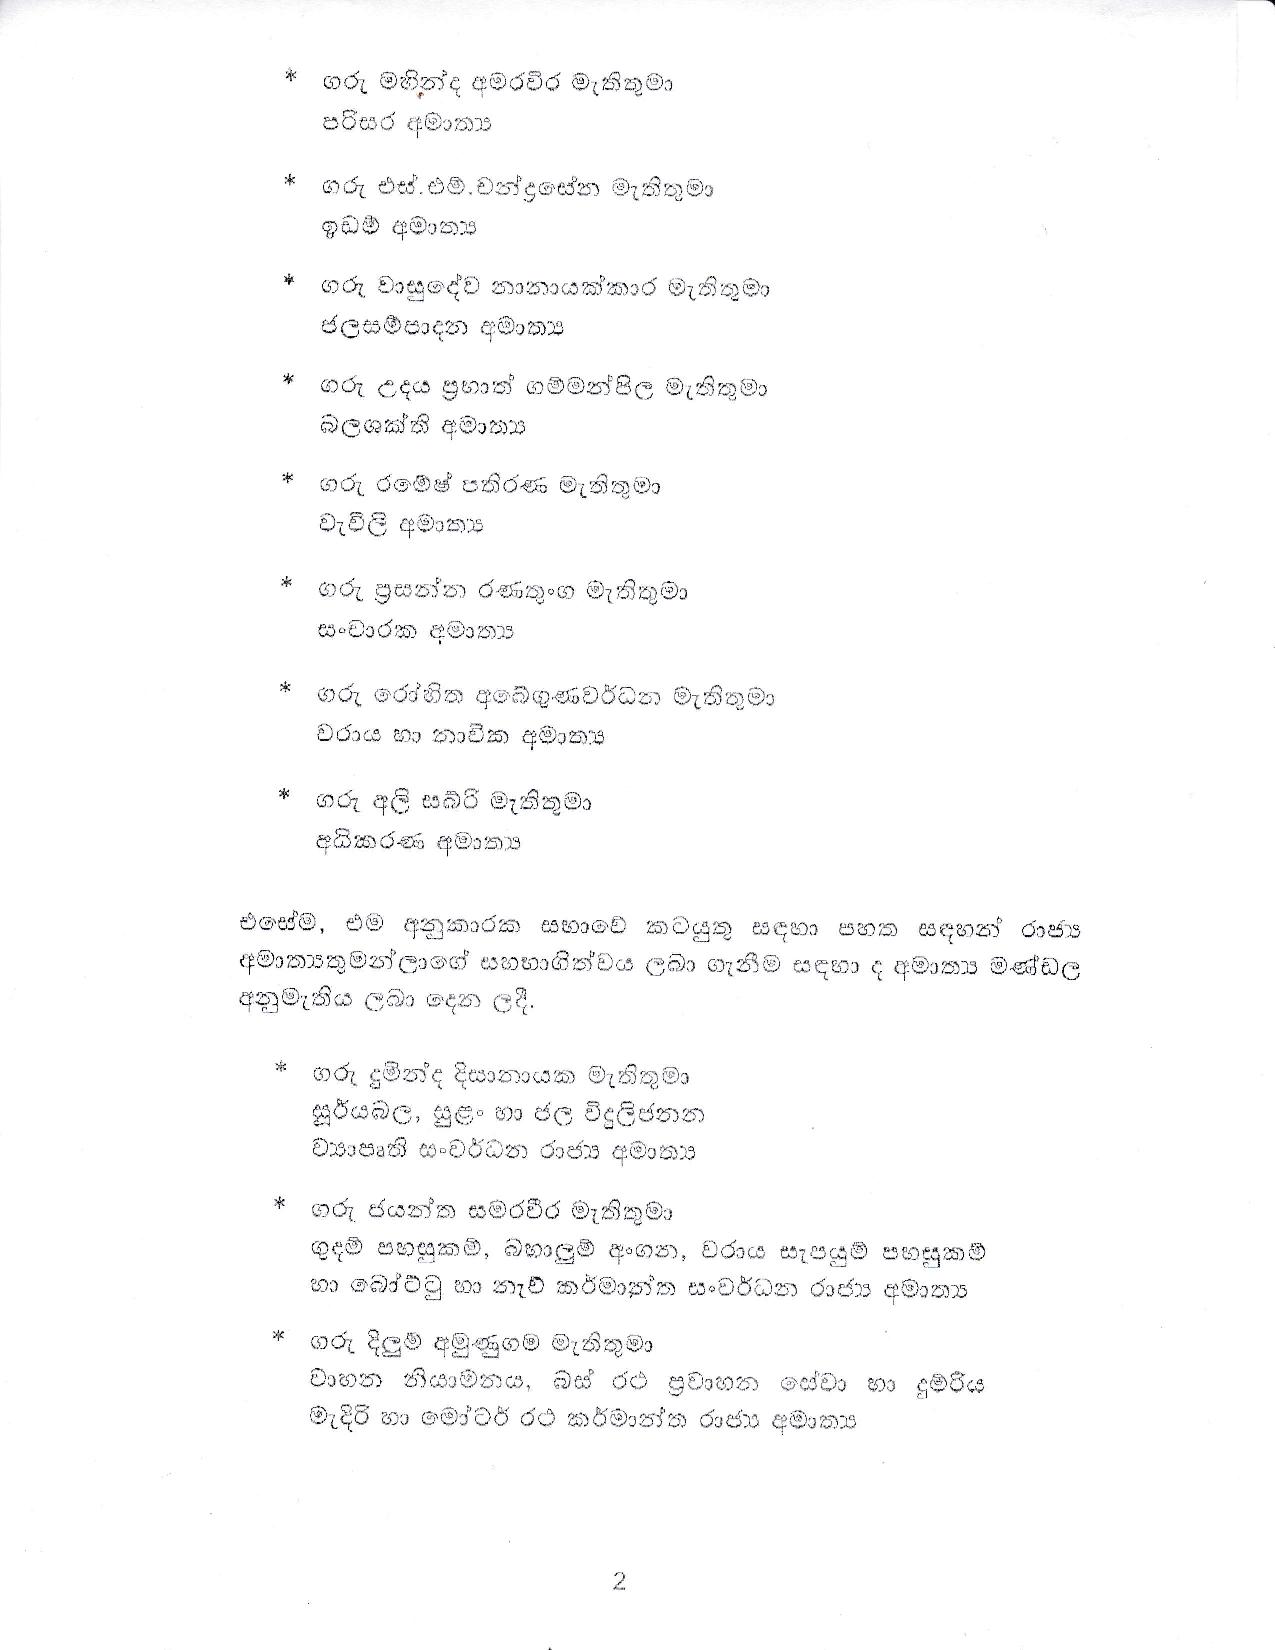 Cabinet decision on 02.09.2020 page 002